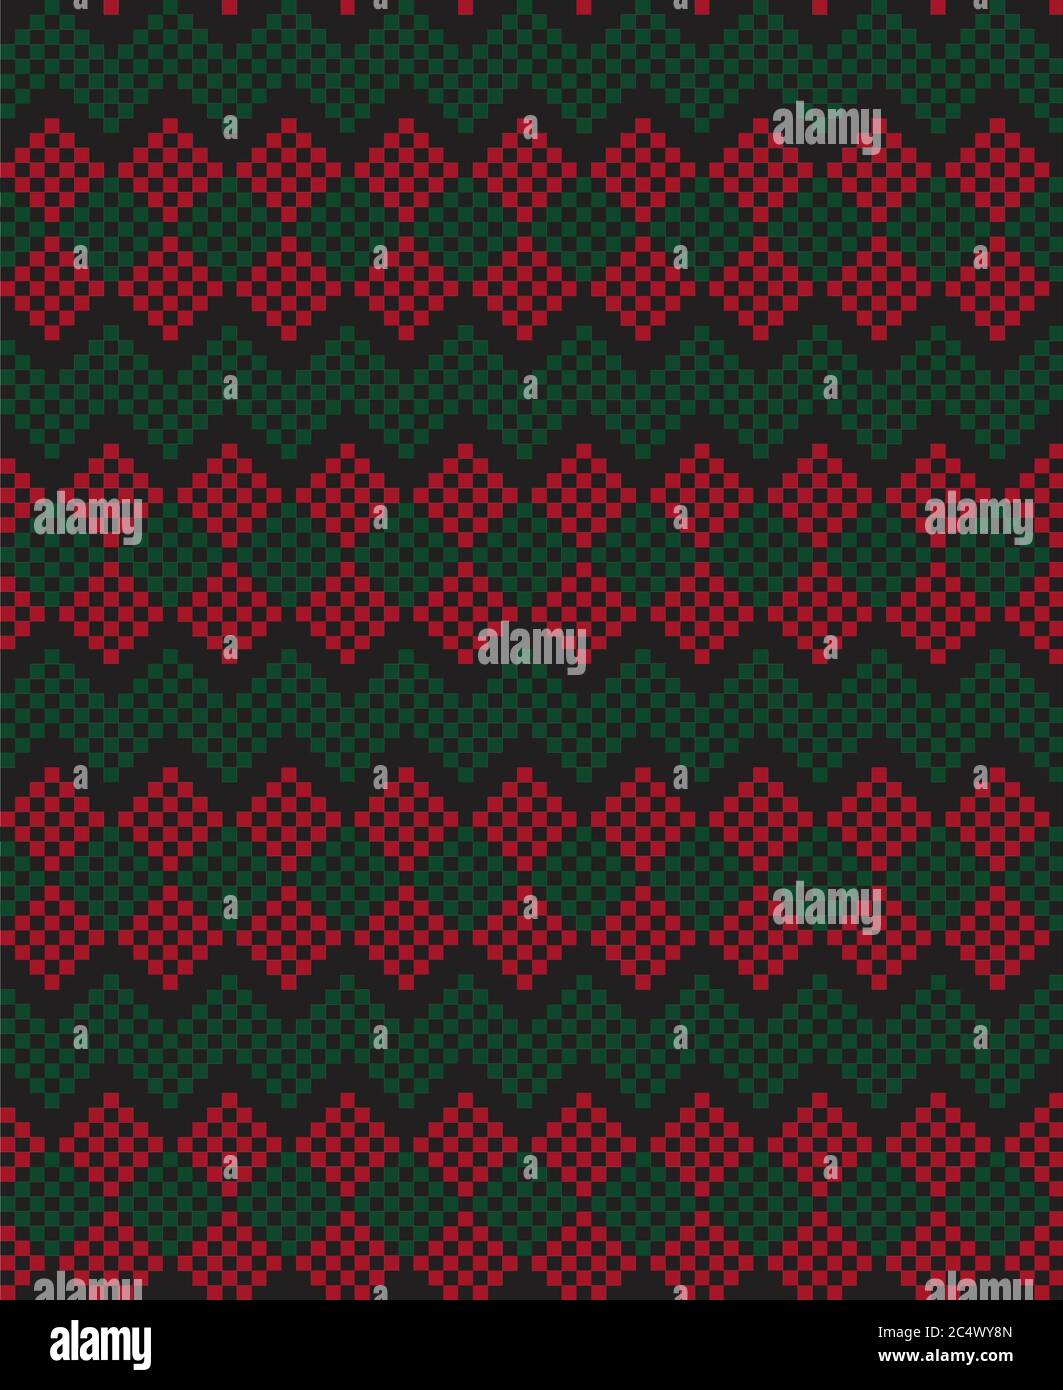 Christmas fair isle pattern background for fashion textiles, knitwear and graphics Stock Photo